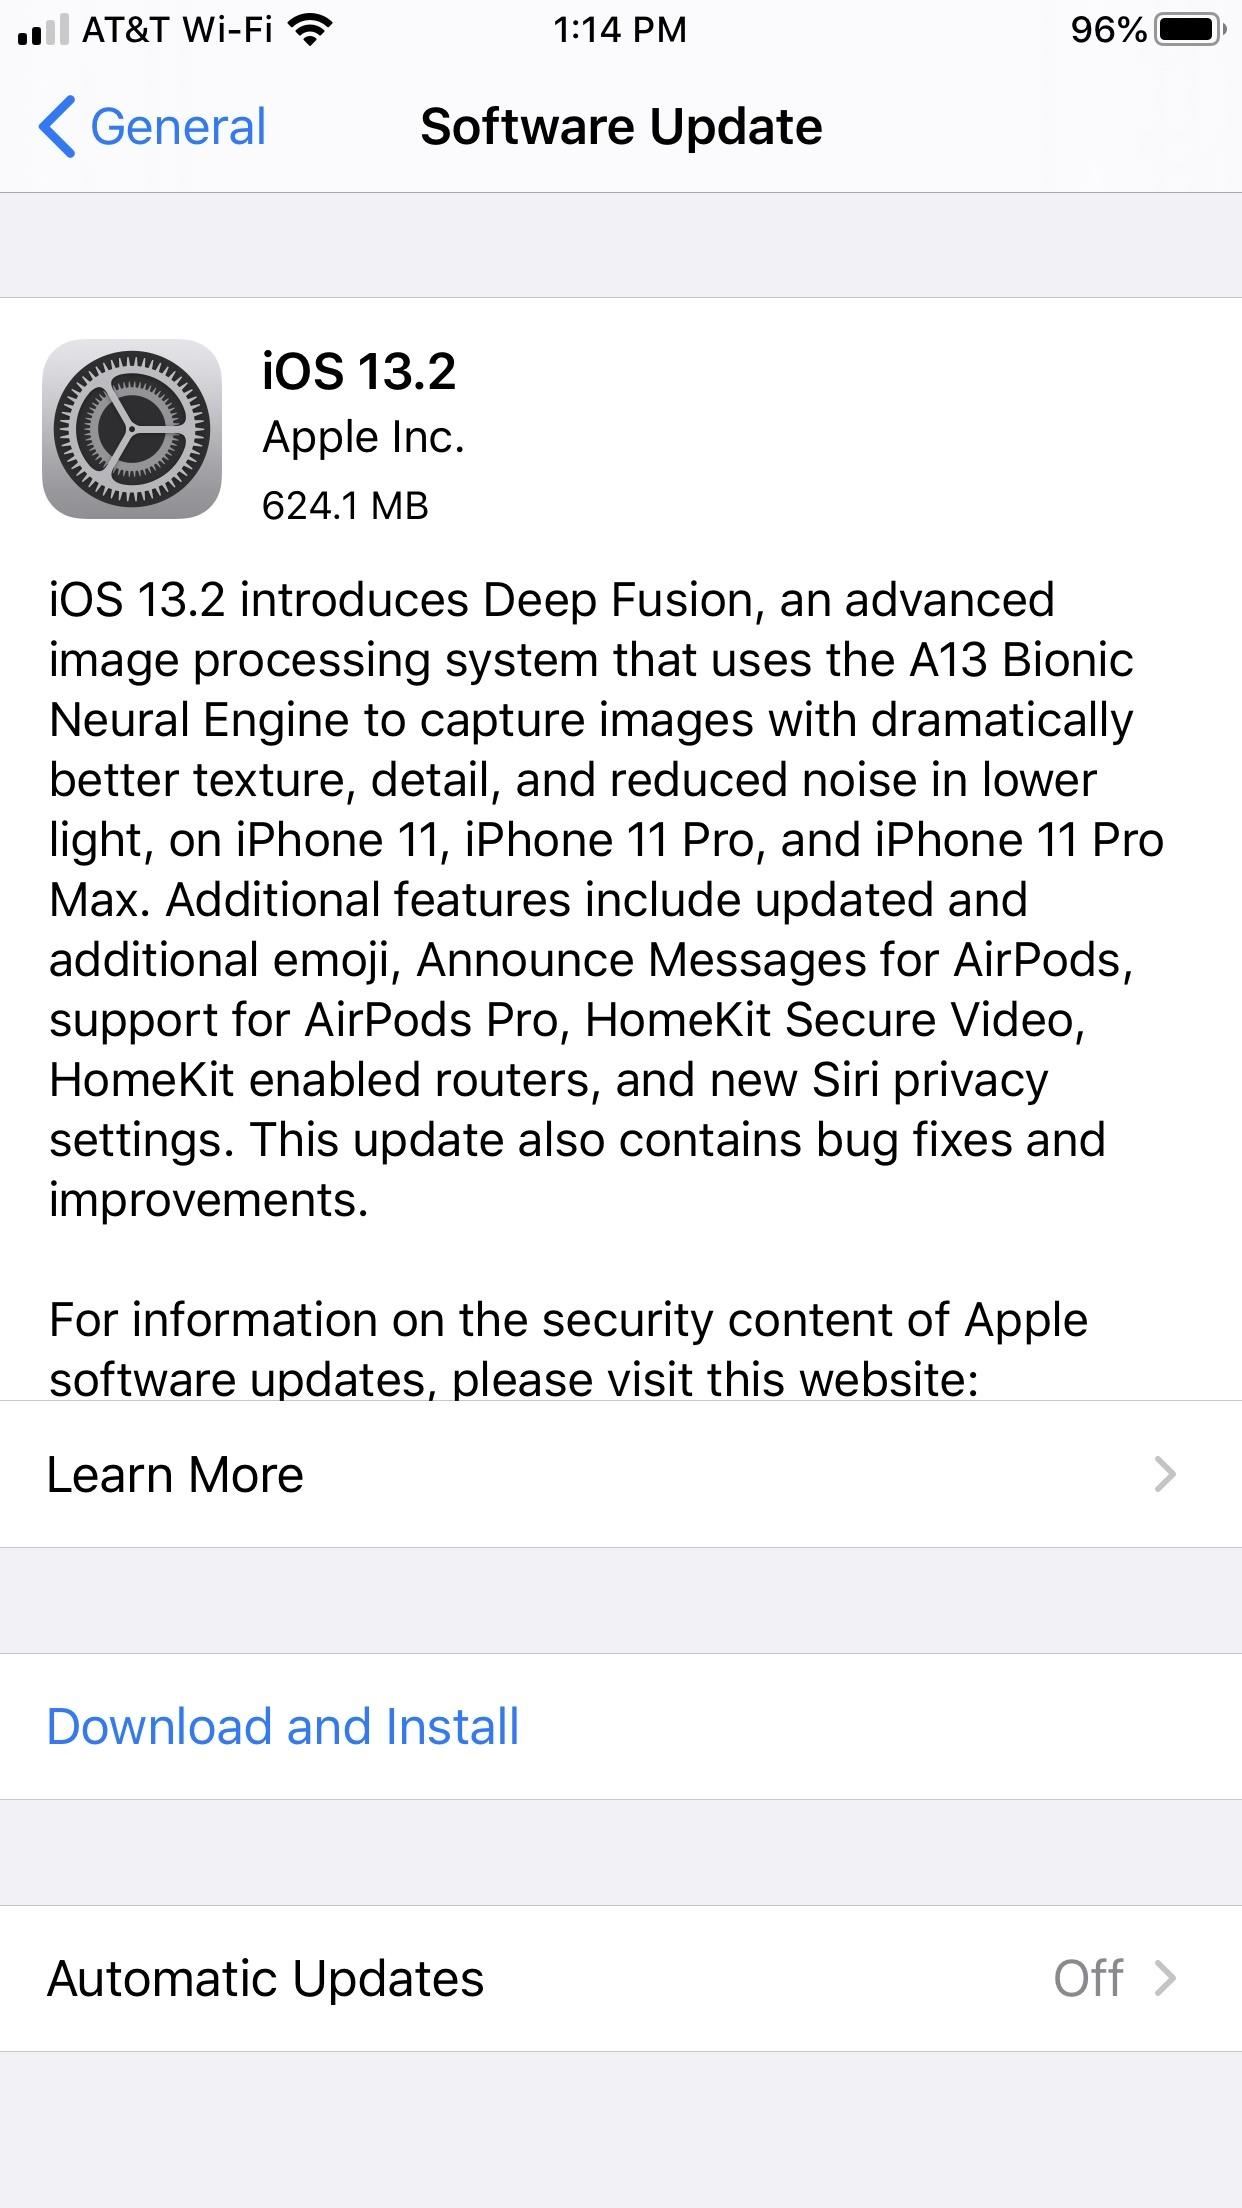 Apple Releases iOS 13.2 for iPhone, Includes Deep Fusion, New Emojis, Announce Messages with Siri & More